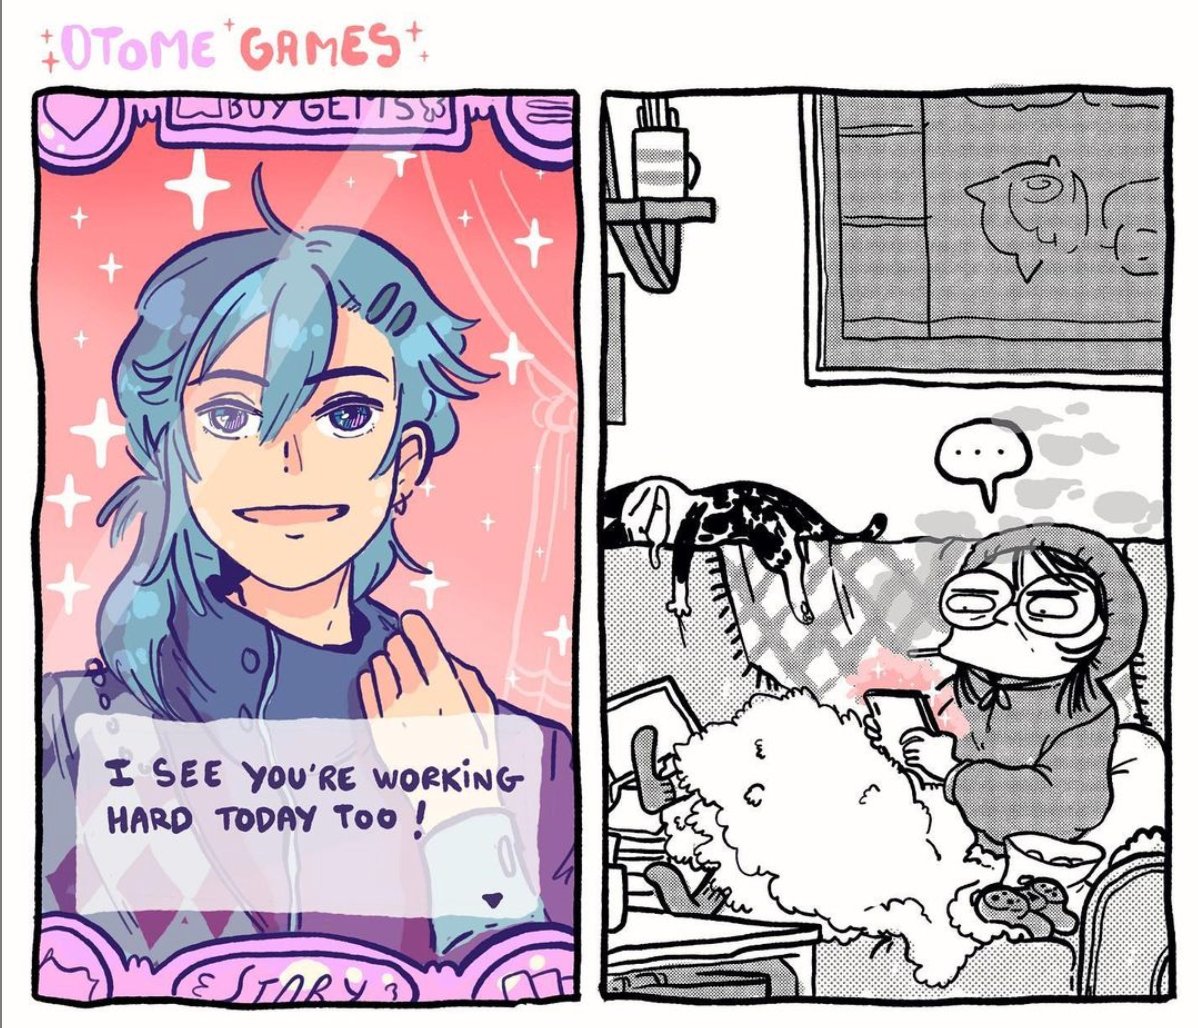 Hello ! I'm surprised but very happy this got so much attention ? Welcome welcome.
If you liked this, you can read more of my comics on my main @heyluchie or my instagram https://t.co/TJEjFiCat1 ! Here's a short one about Otome Games 